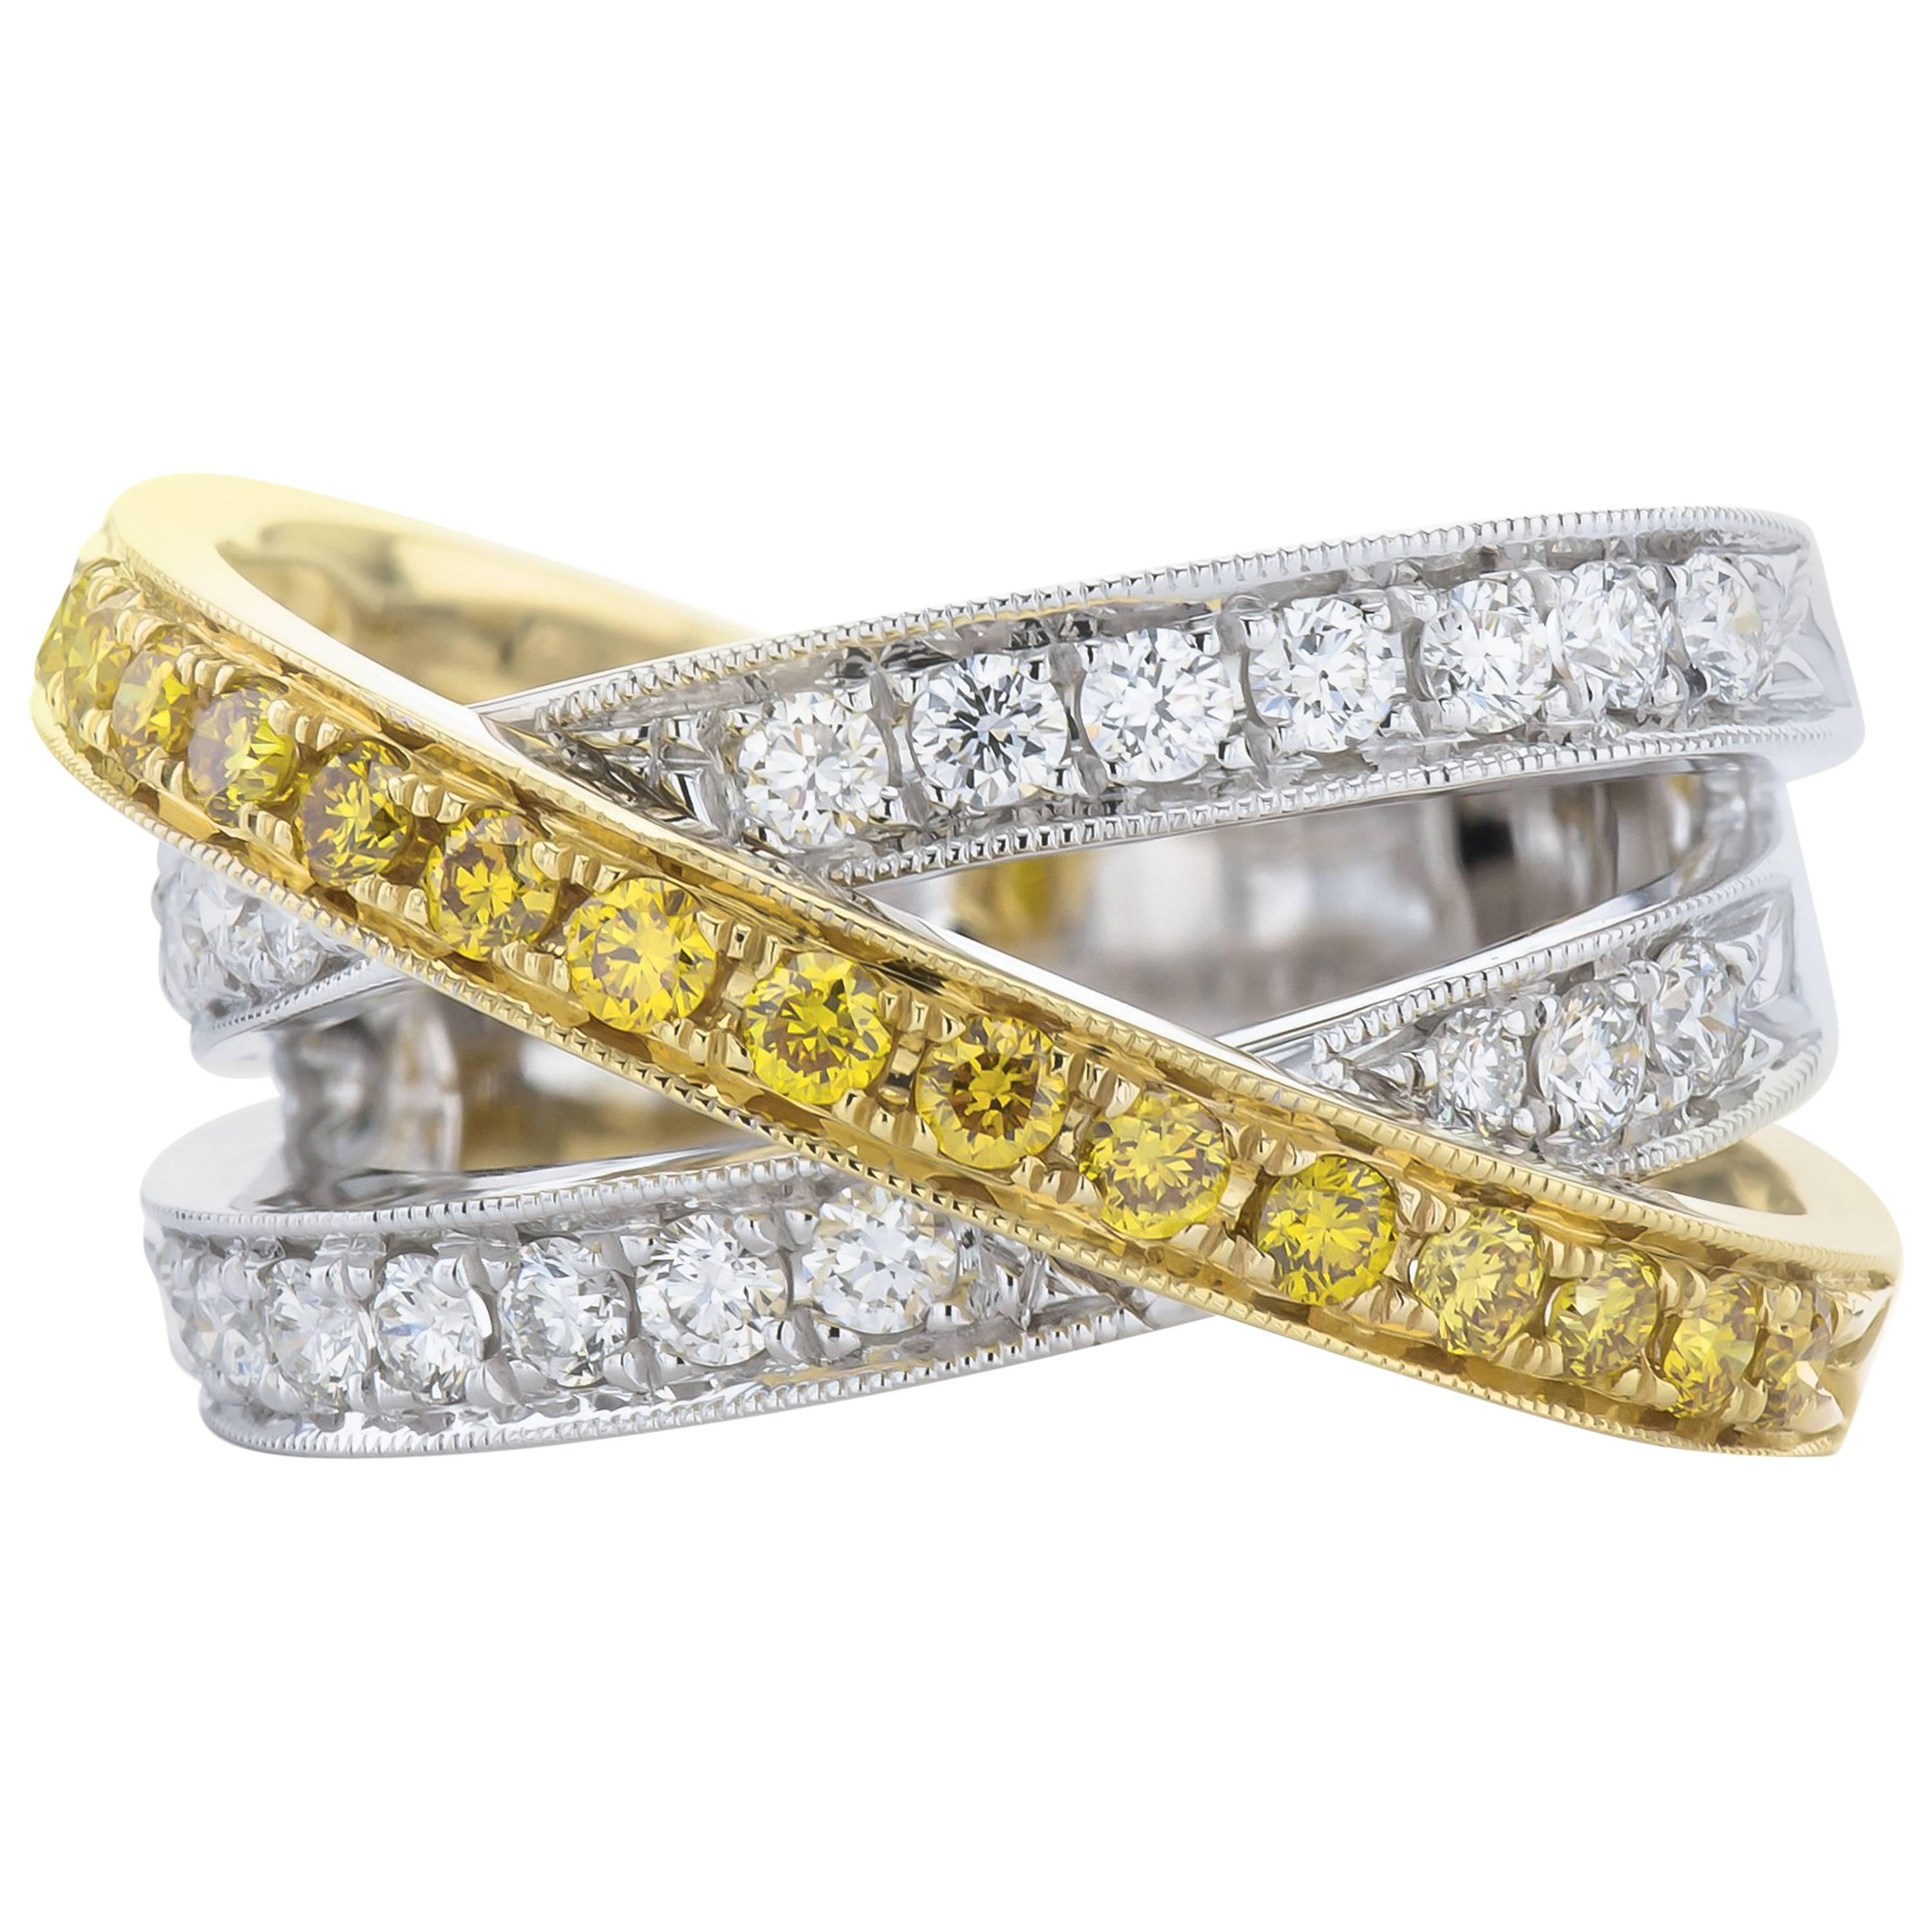 White and Yellow Gold Ring with White and Yellow Diamonds